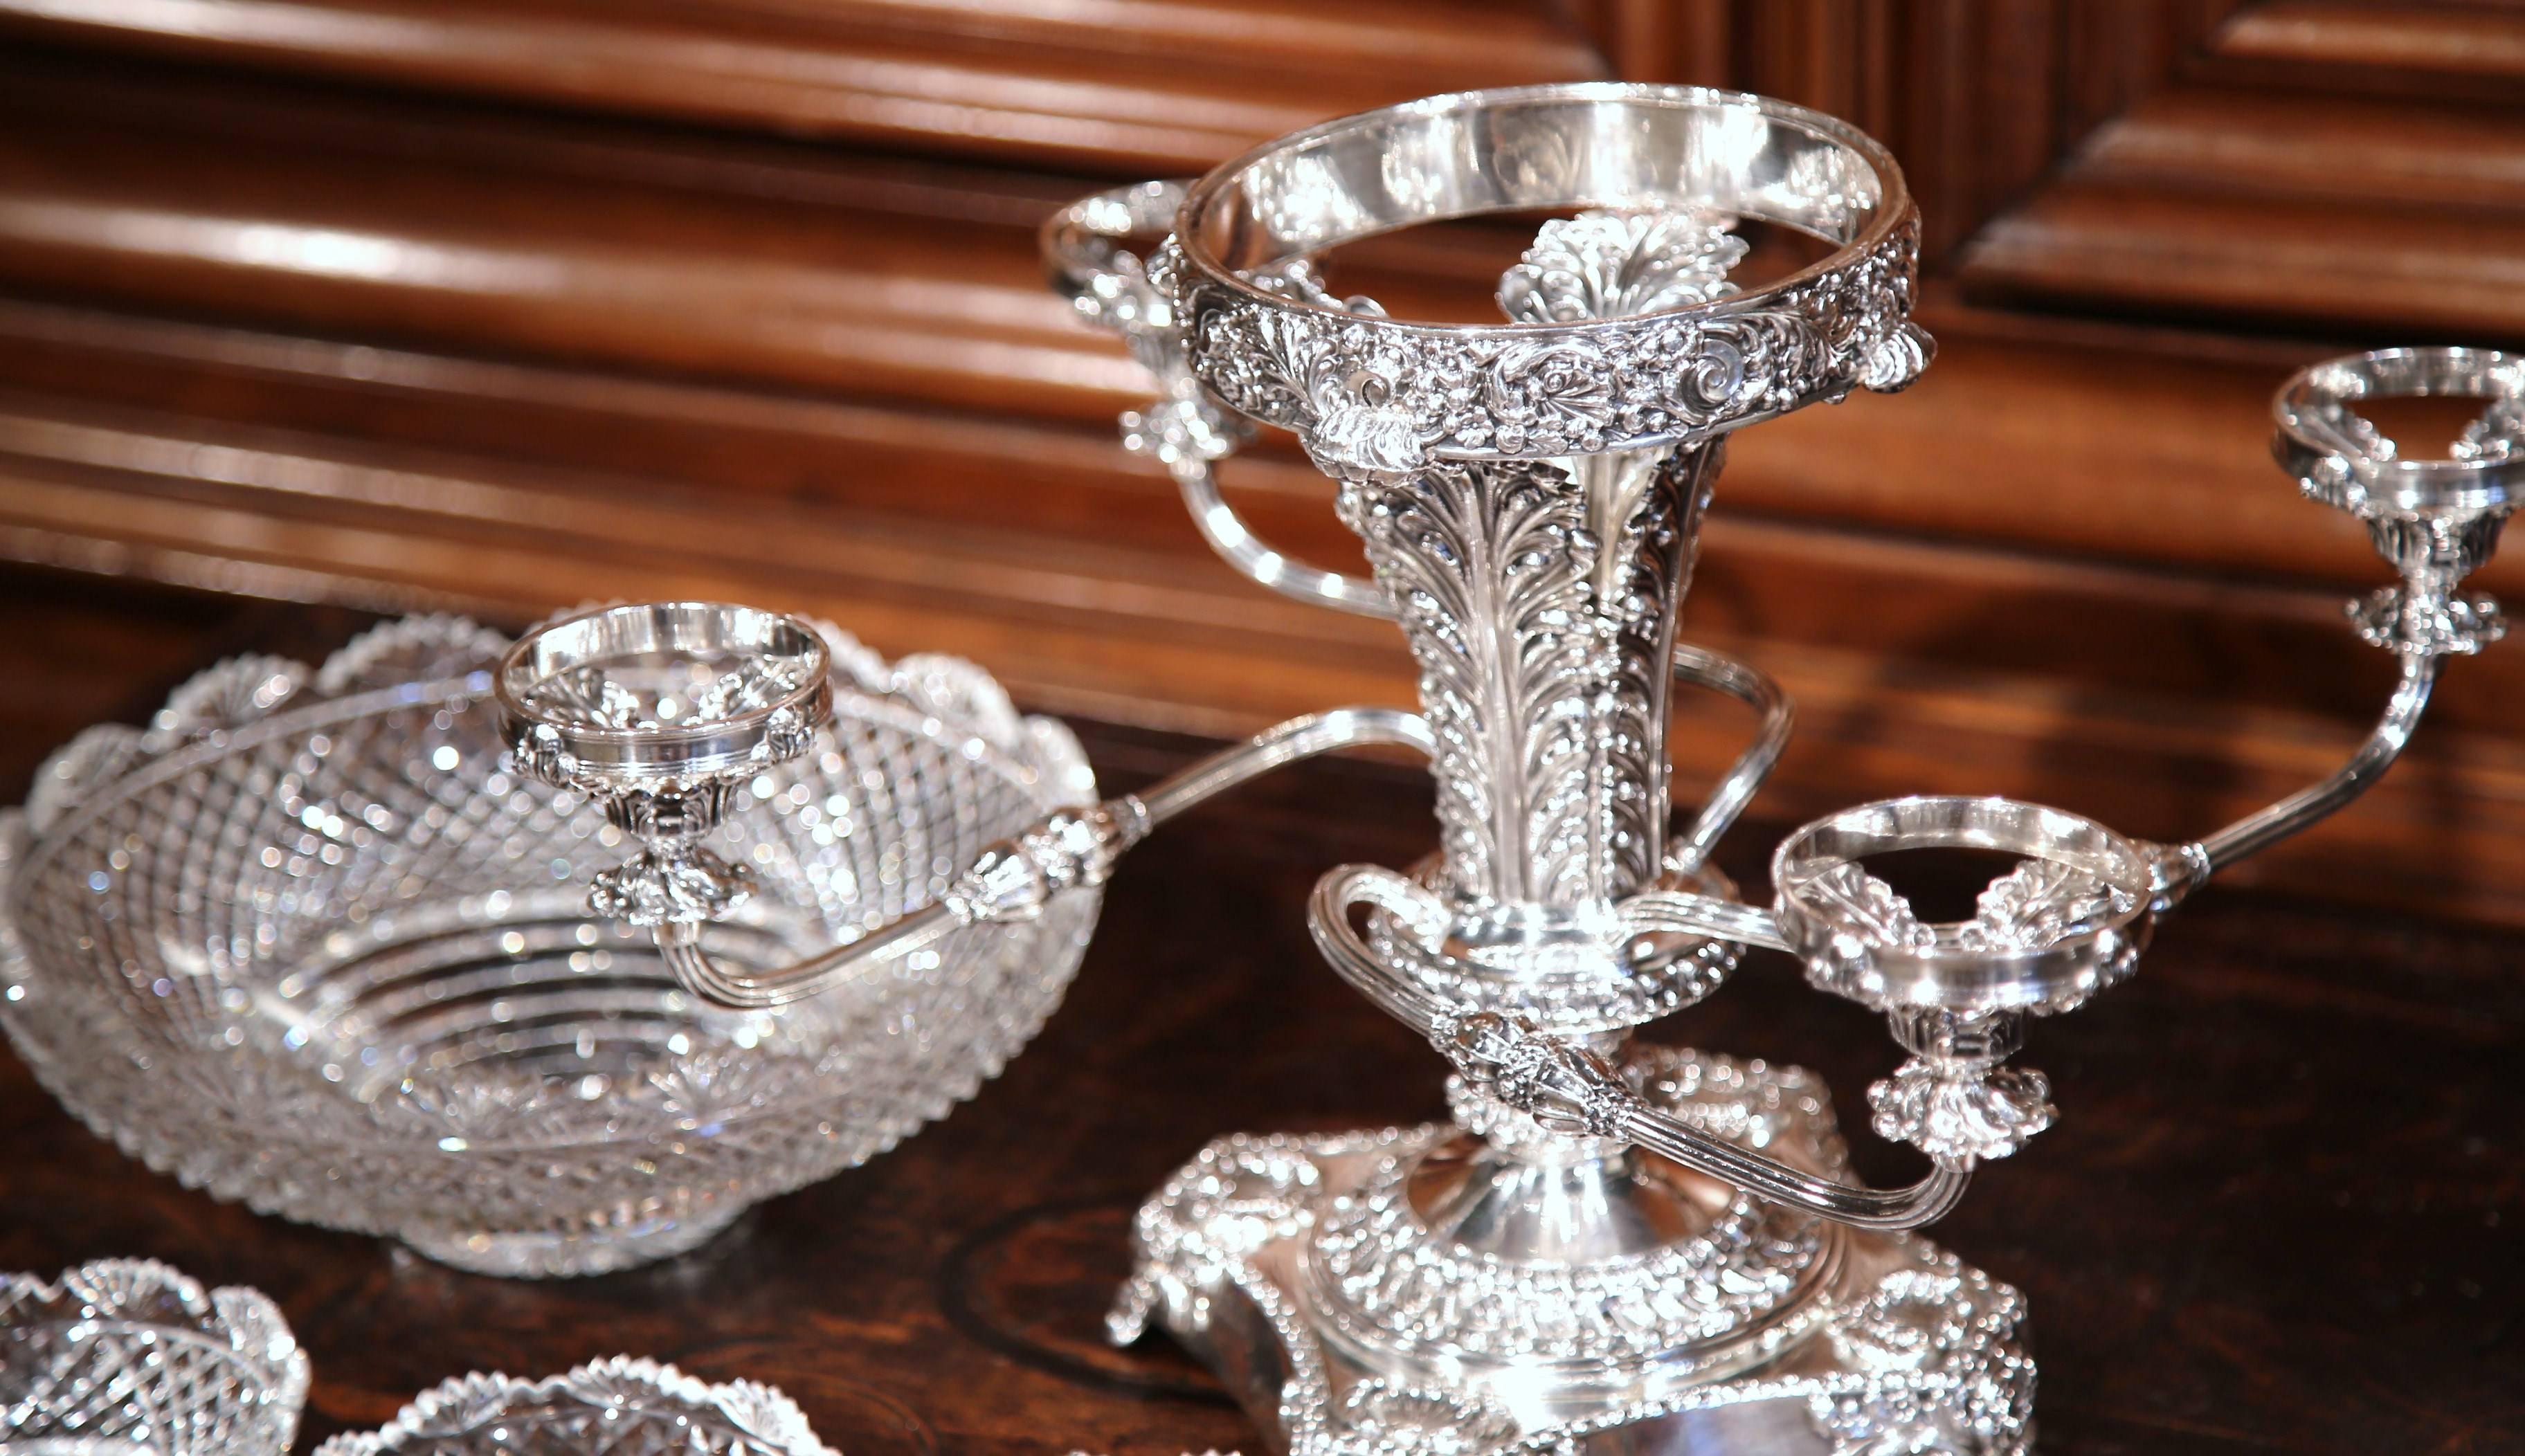 19th Century English Silver Plated Epergne Centrepiece with Five Cut-Glass Bowls 3